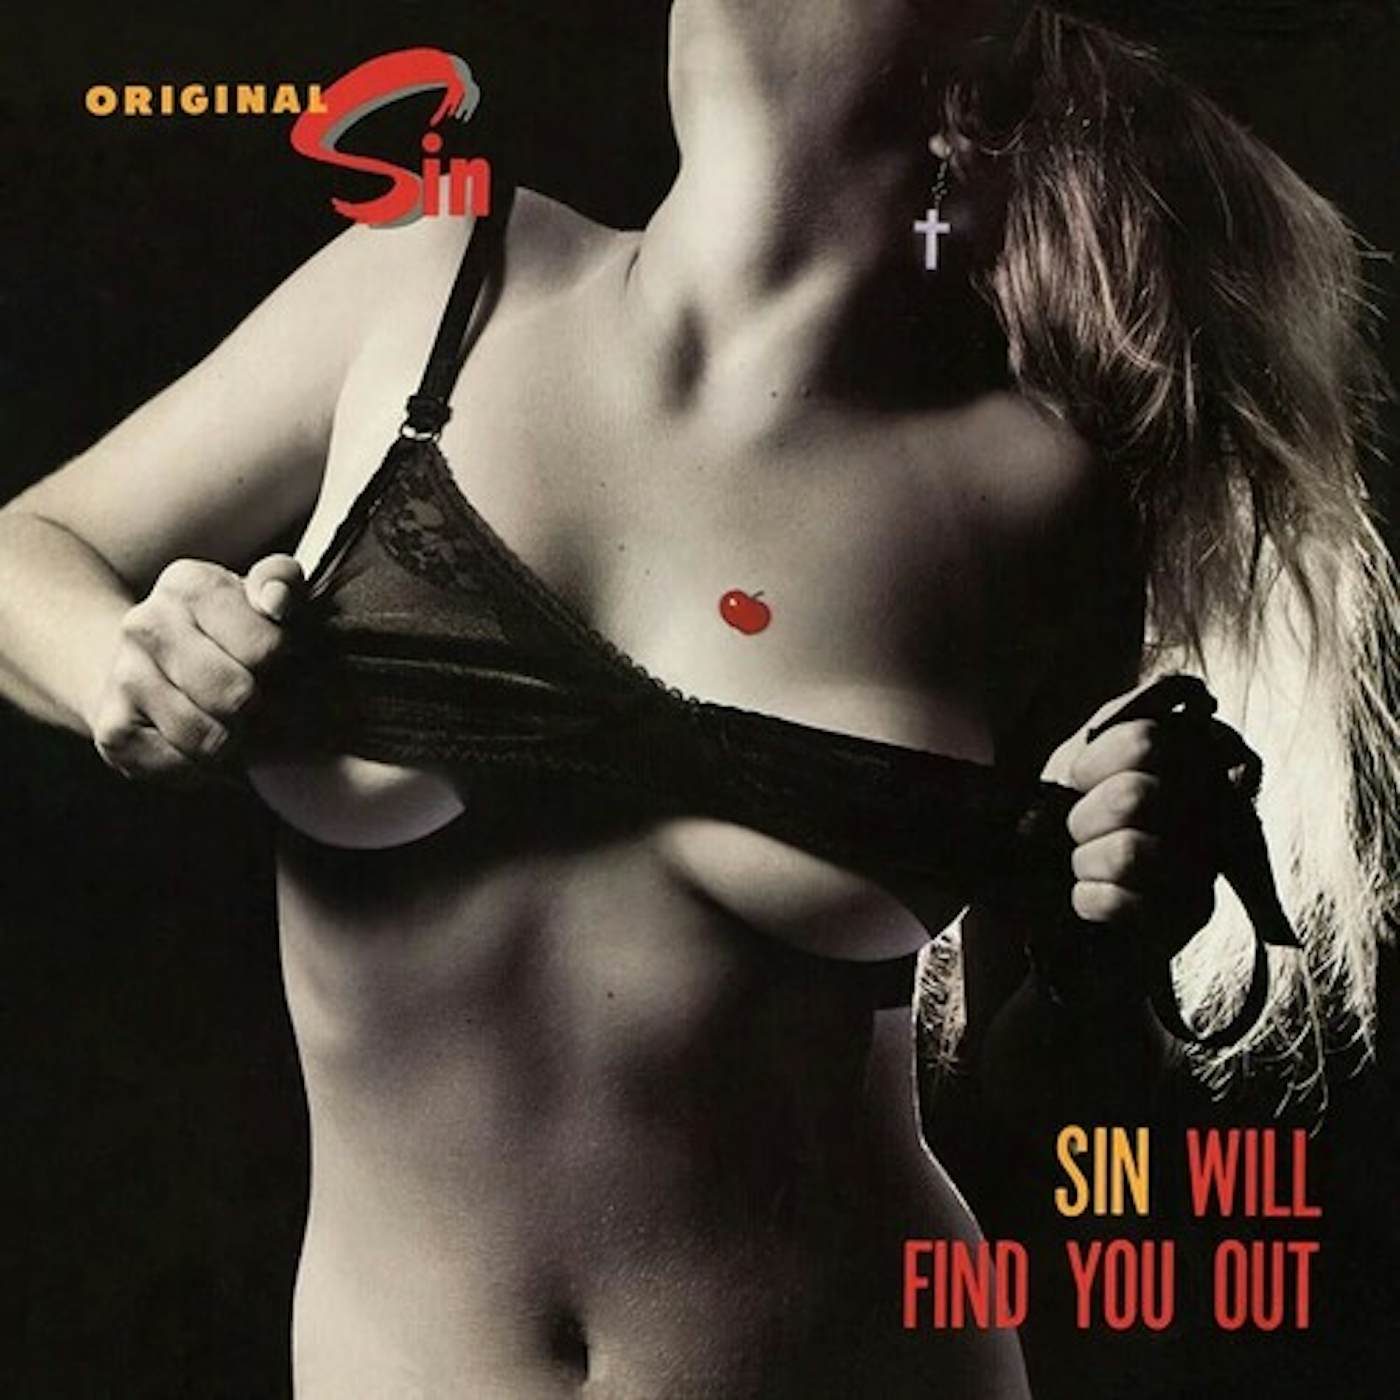 Original Sin SIN WILL FIND YOU OUT - SILVER Vinyl Record